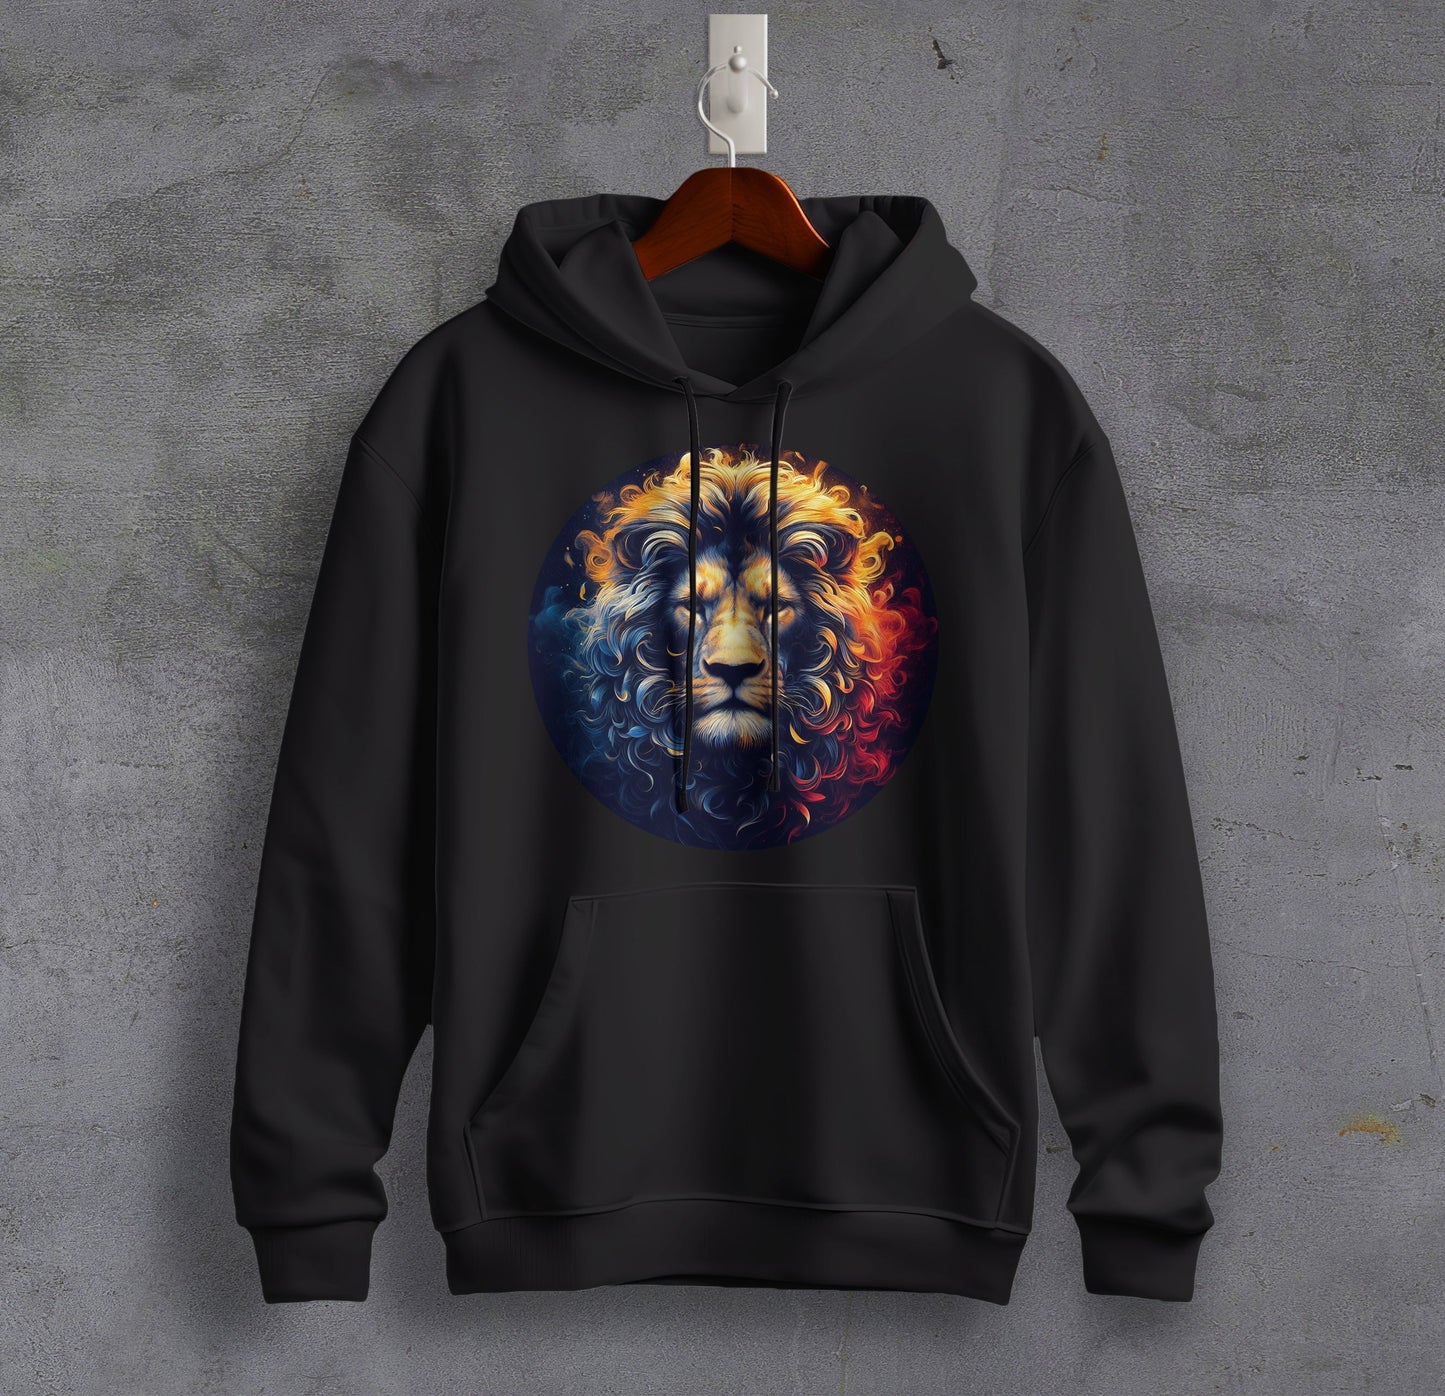 Lion's Pride - Graphic Printed Hooded Sweat Shirt for Men - Cotton - Magnificence of India Sweat Shirt